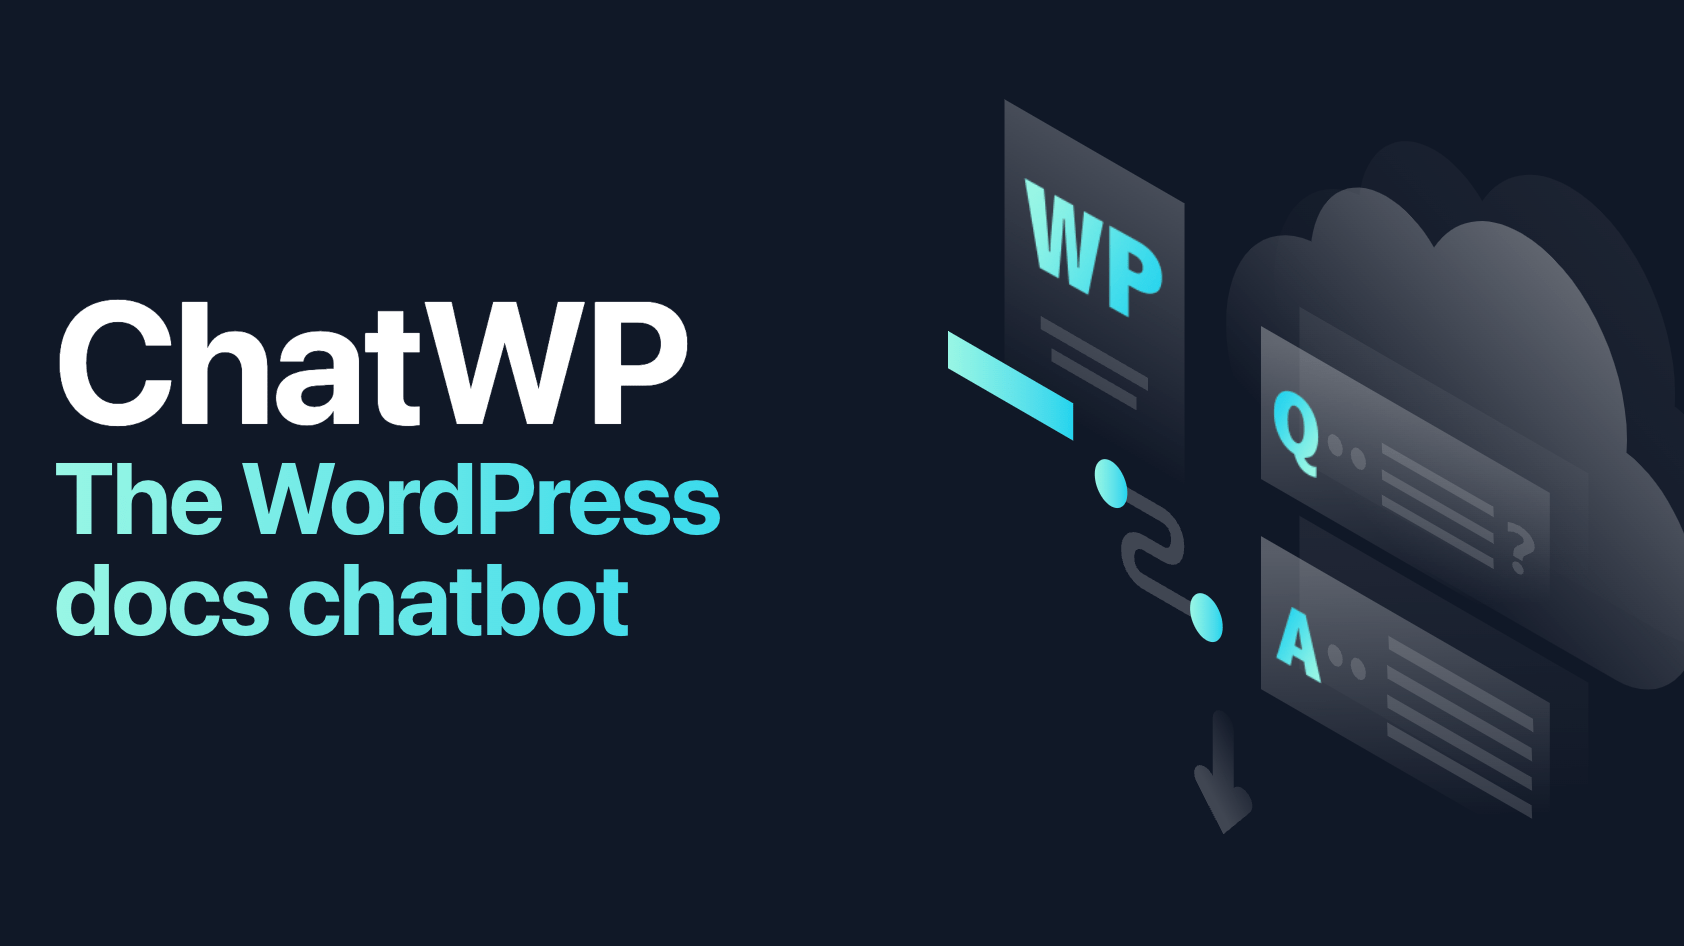 ChatWP - A custom chatbot from your own data and integration with websites, apps, and more